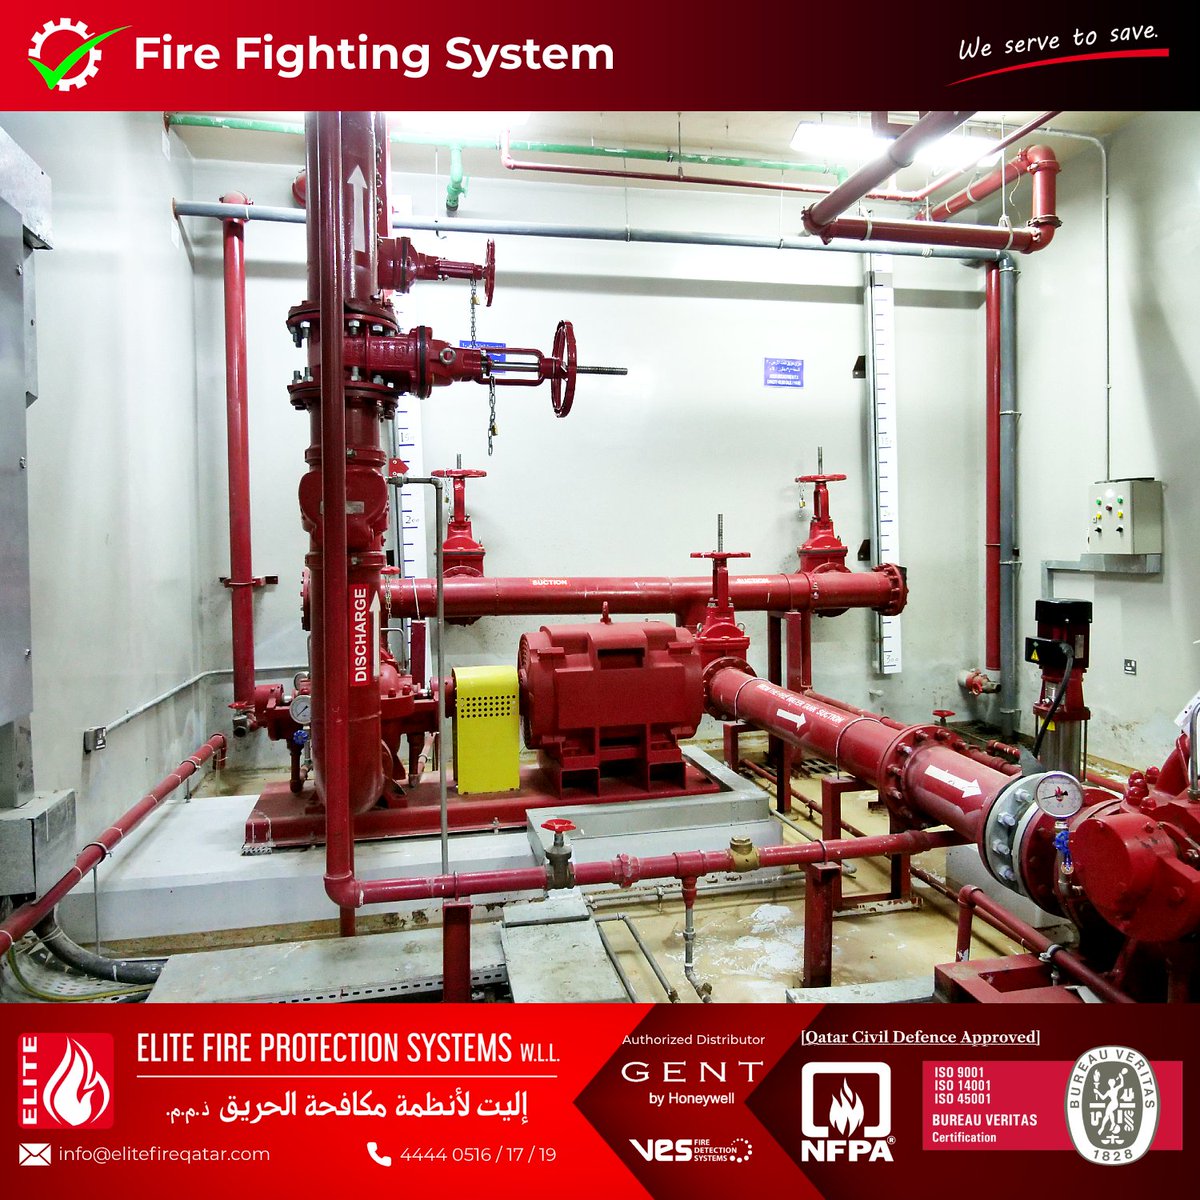 🛡 Protect your business with a powerful #ELITE Fire Fighting System 🛡⠀
To know more about our fire fighting systems, please call 4444 0516 or email at info@elitefireqatar.com ✅⠀
#WeServeToSave #Qatar #FireProtection #FireFighting #QatarProjects